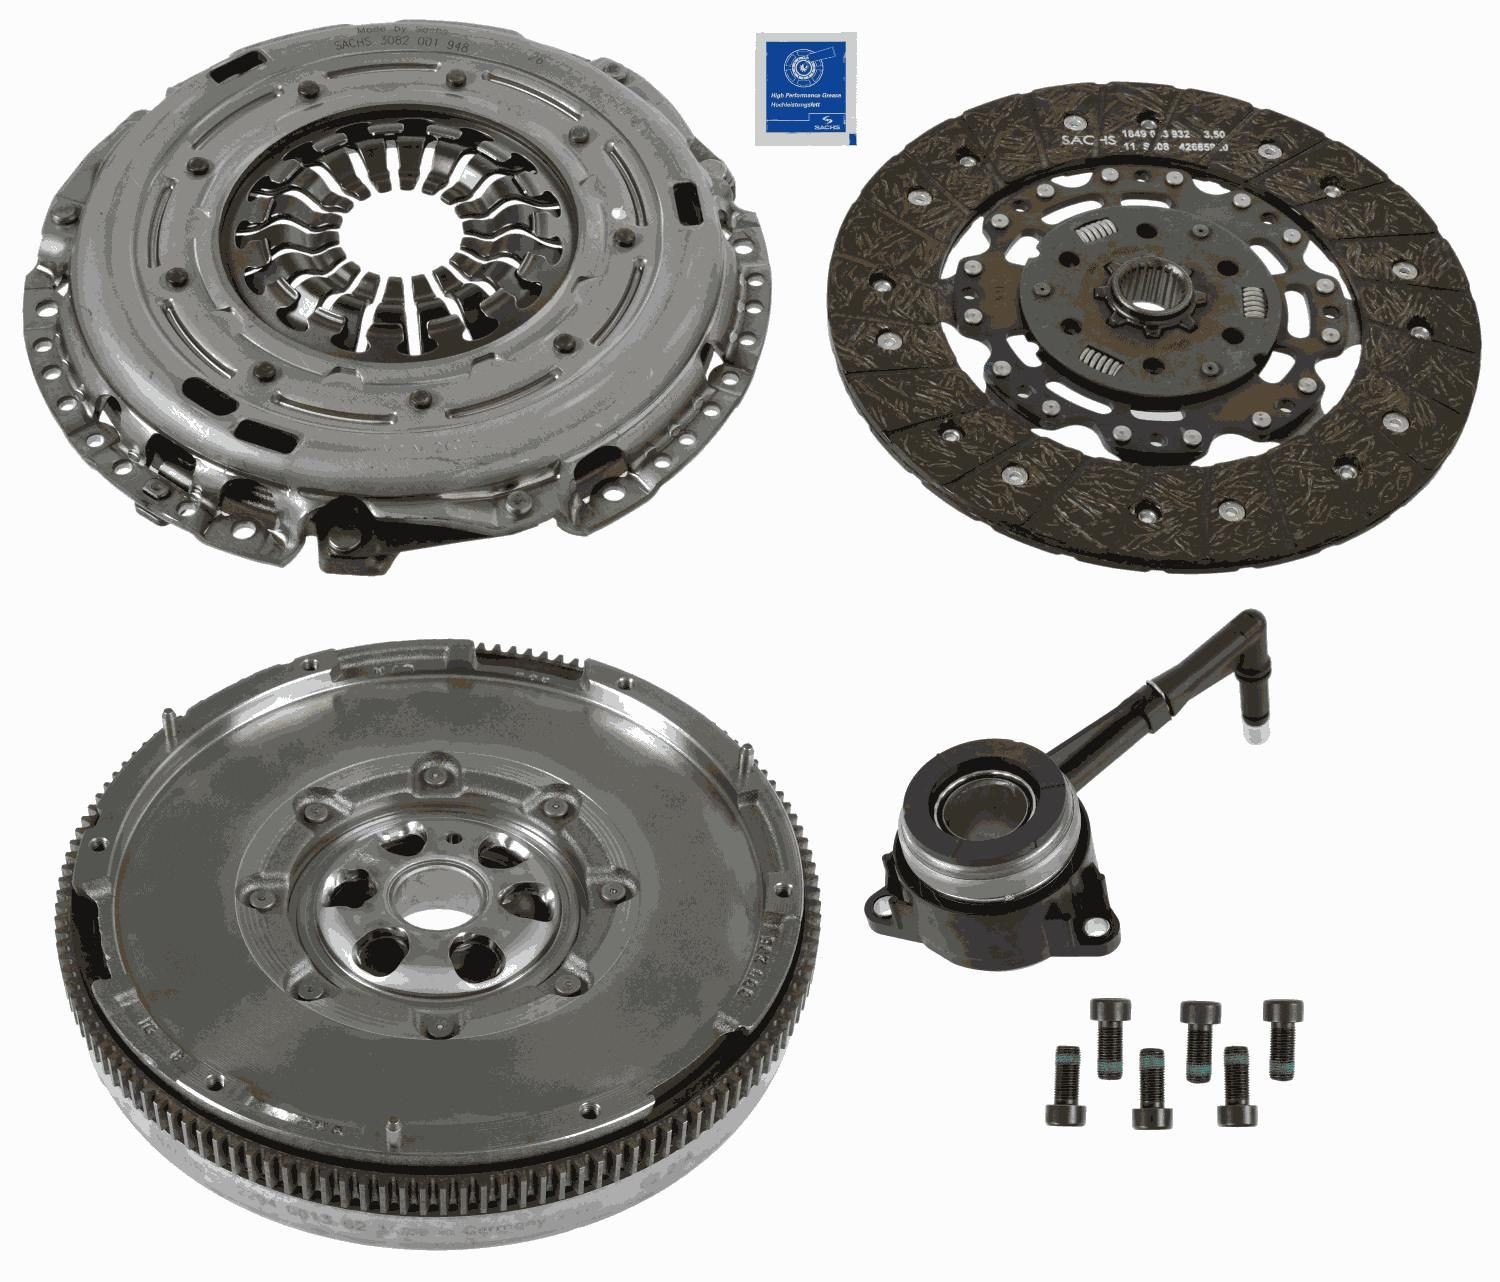 SACHS Clutch replacement kit Touran 1t3 new 2290 601 141